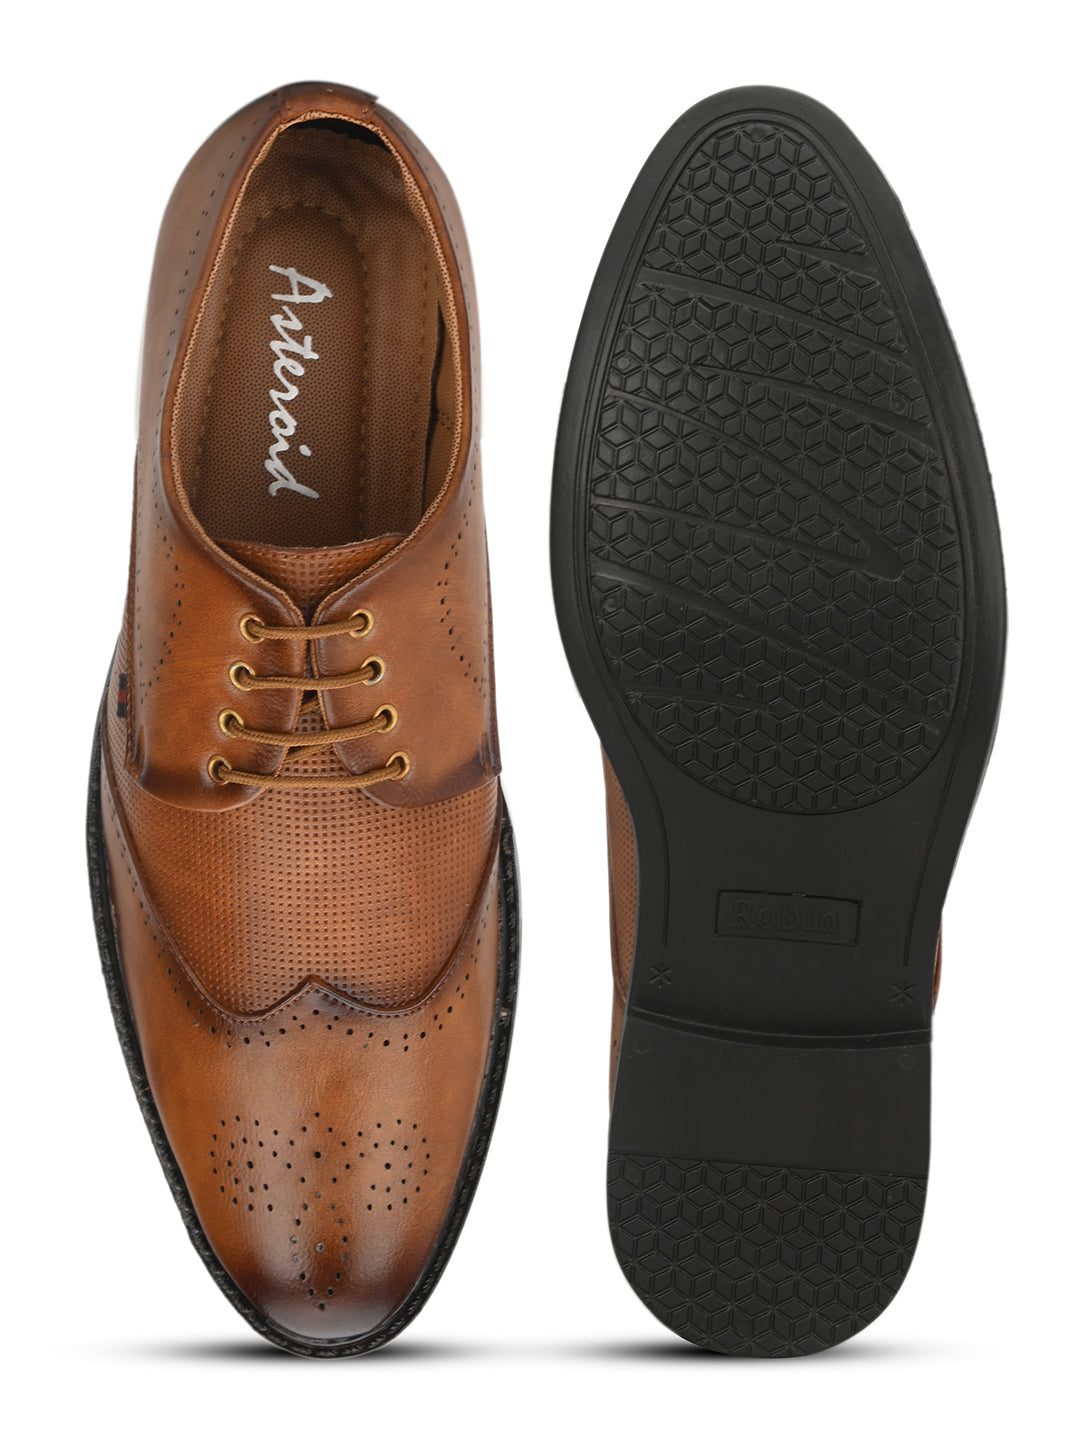 ASTEROID Men's Formal Brogue Shoes.